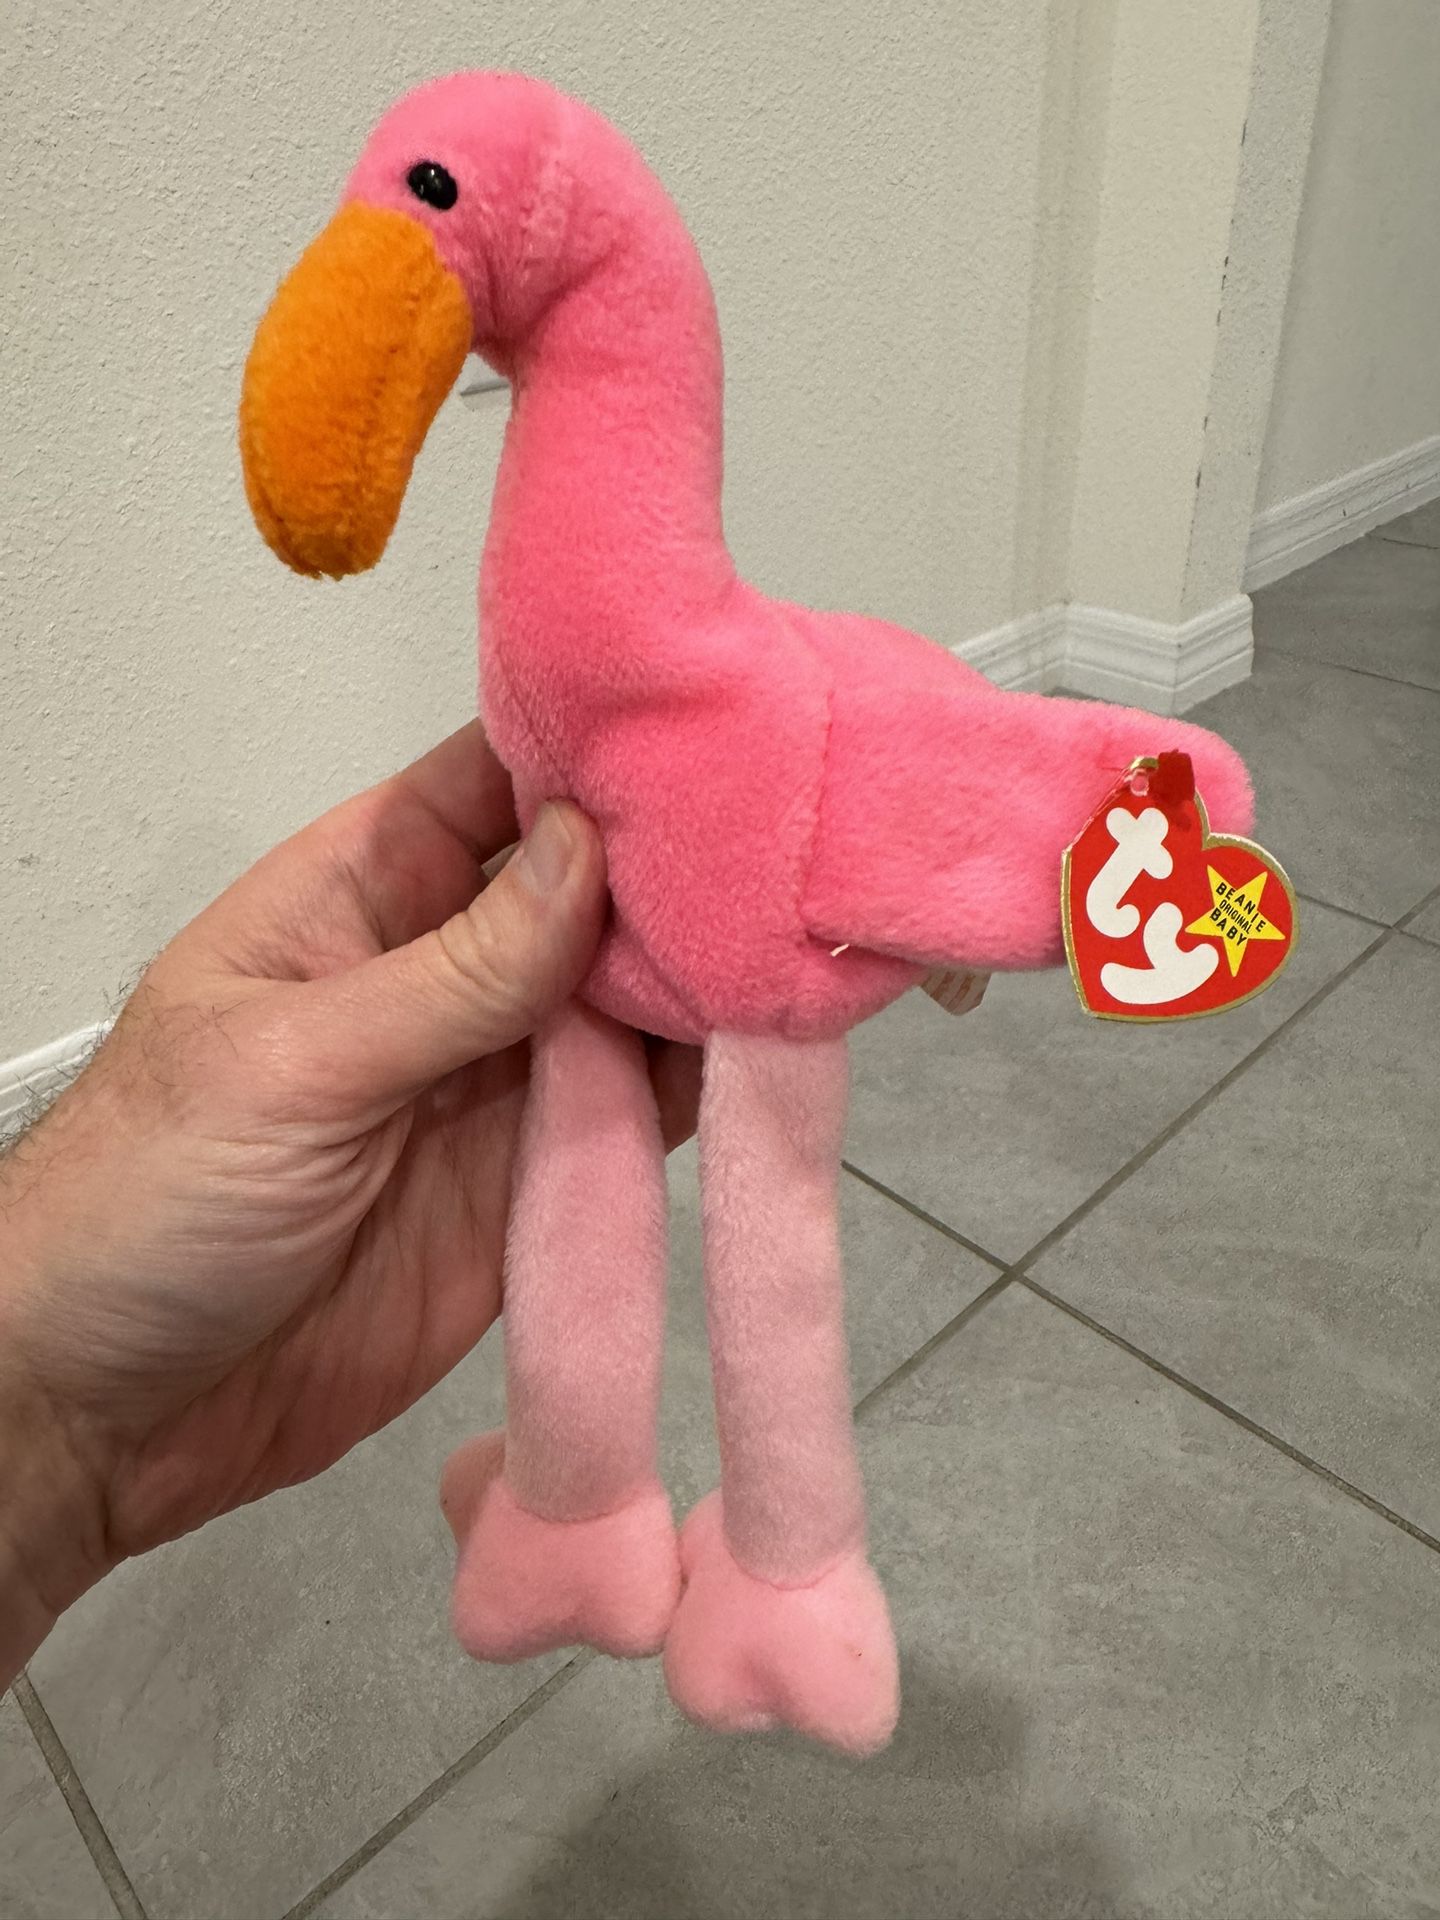 RARE Ty Beanie Babies Pinky The Flamingo Birth Date 2-13-95 Style No 4072